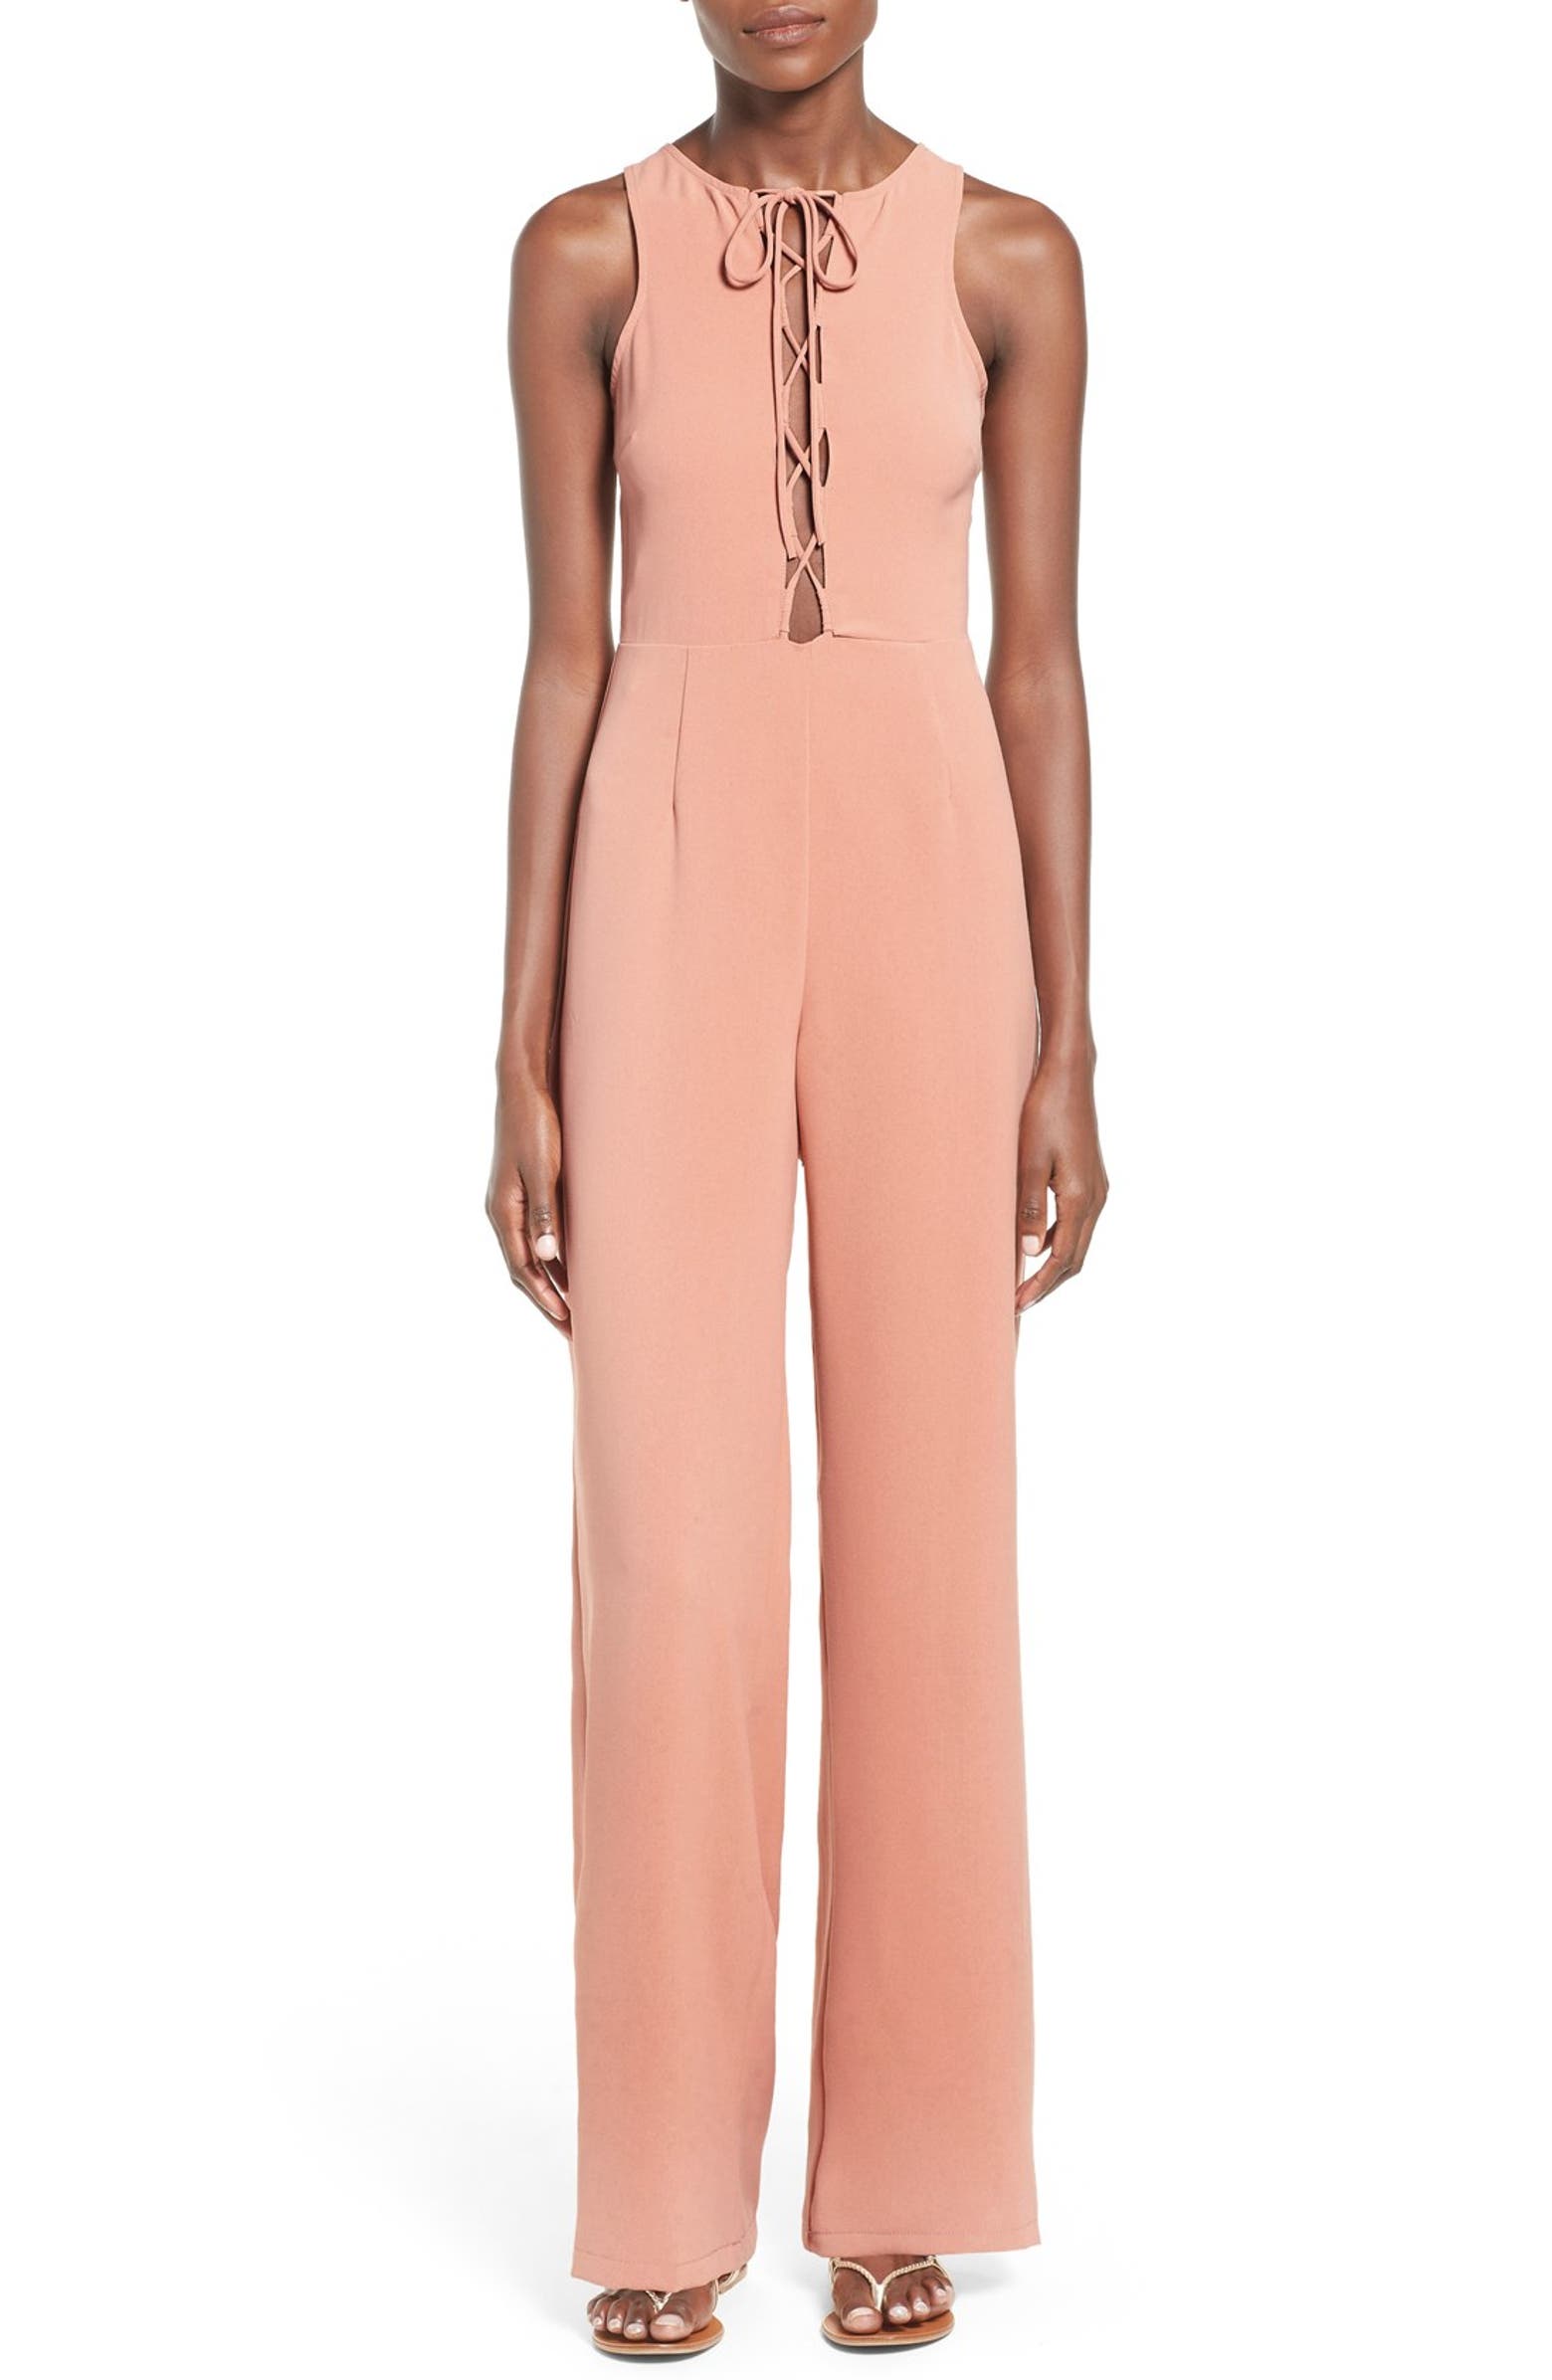 Missguided Lace-Up Sleeveless Jumpsuit | Nordstrom